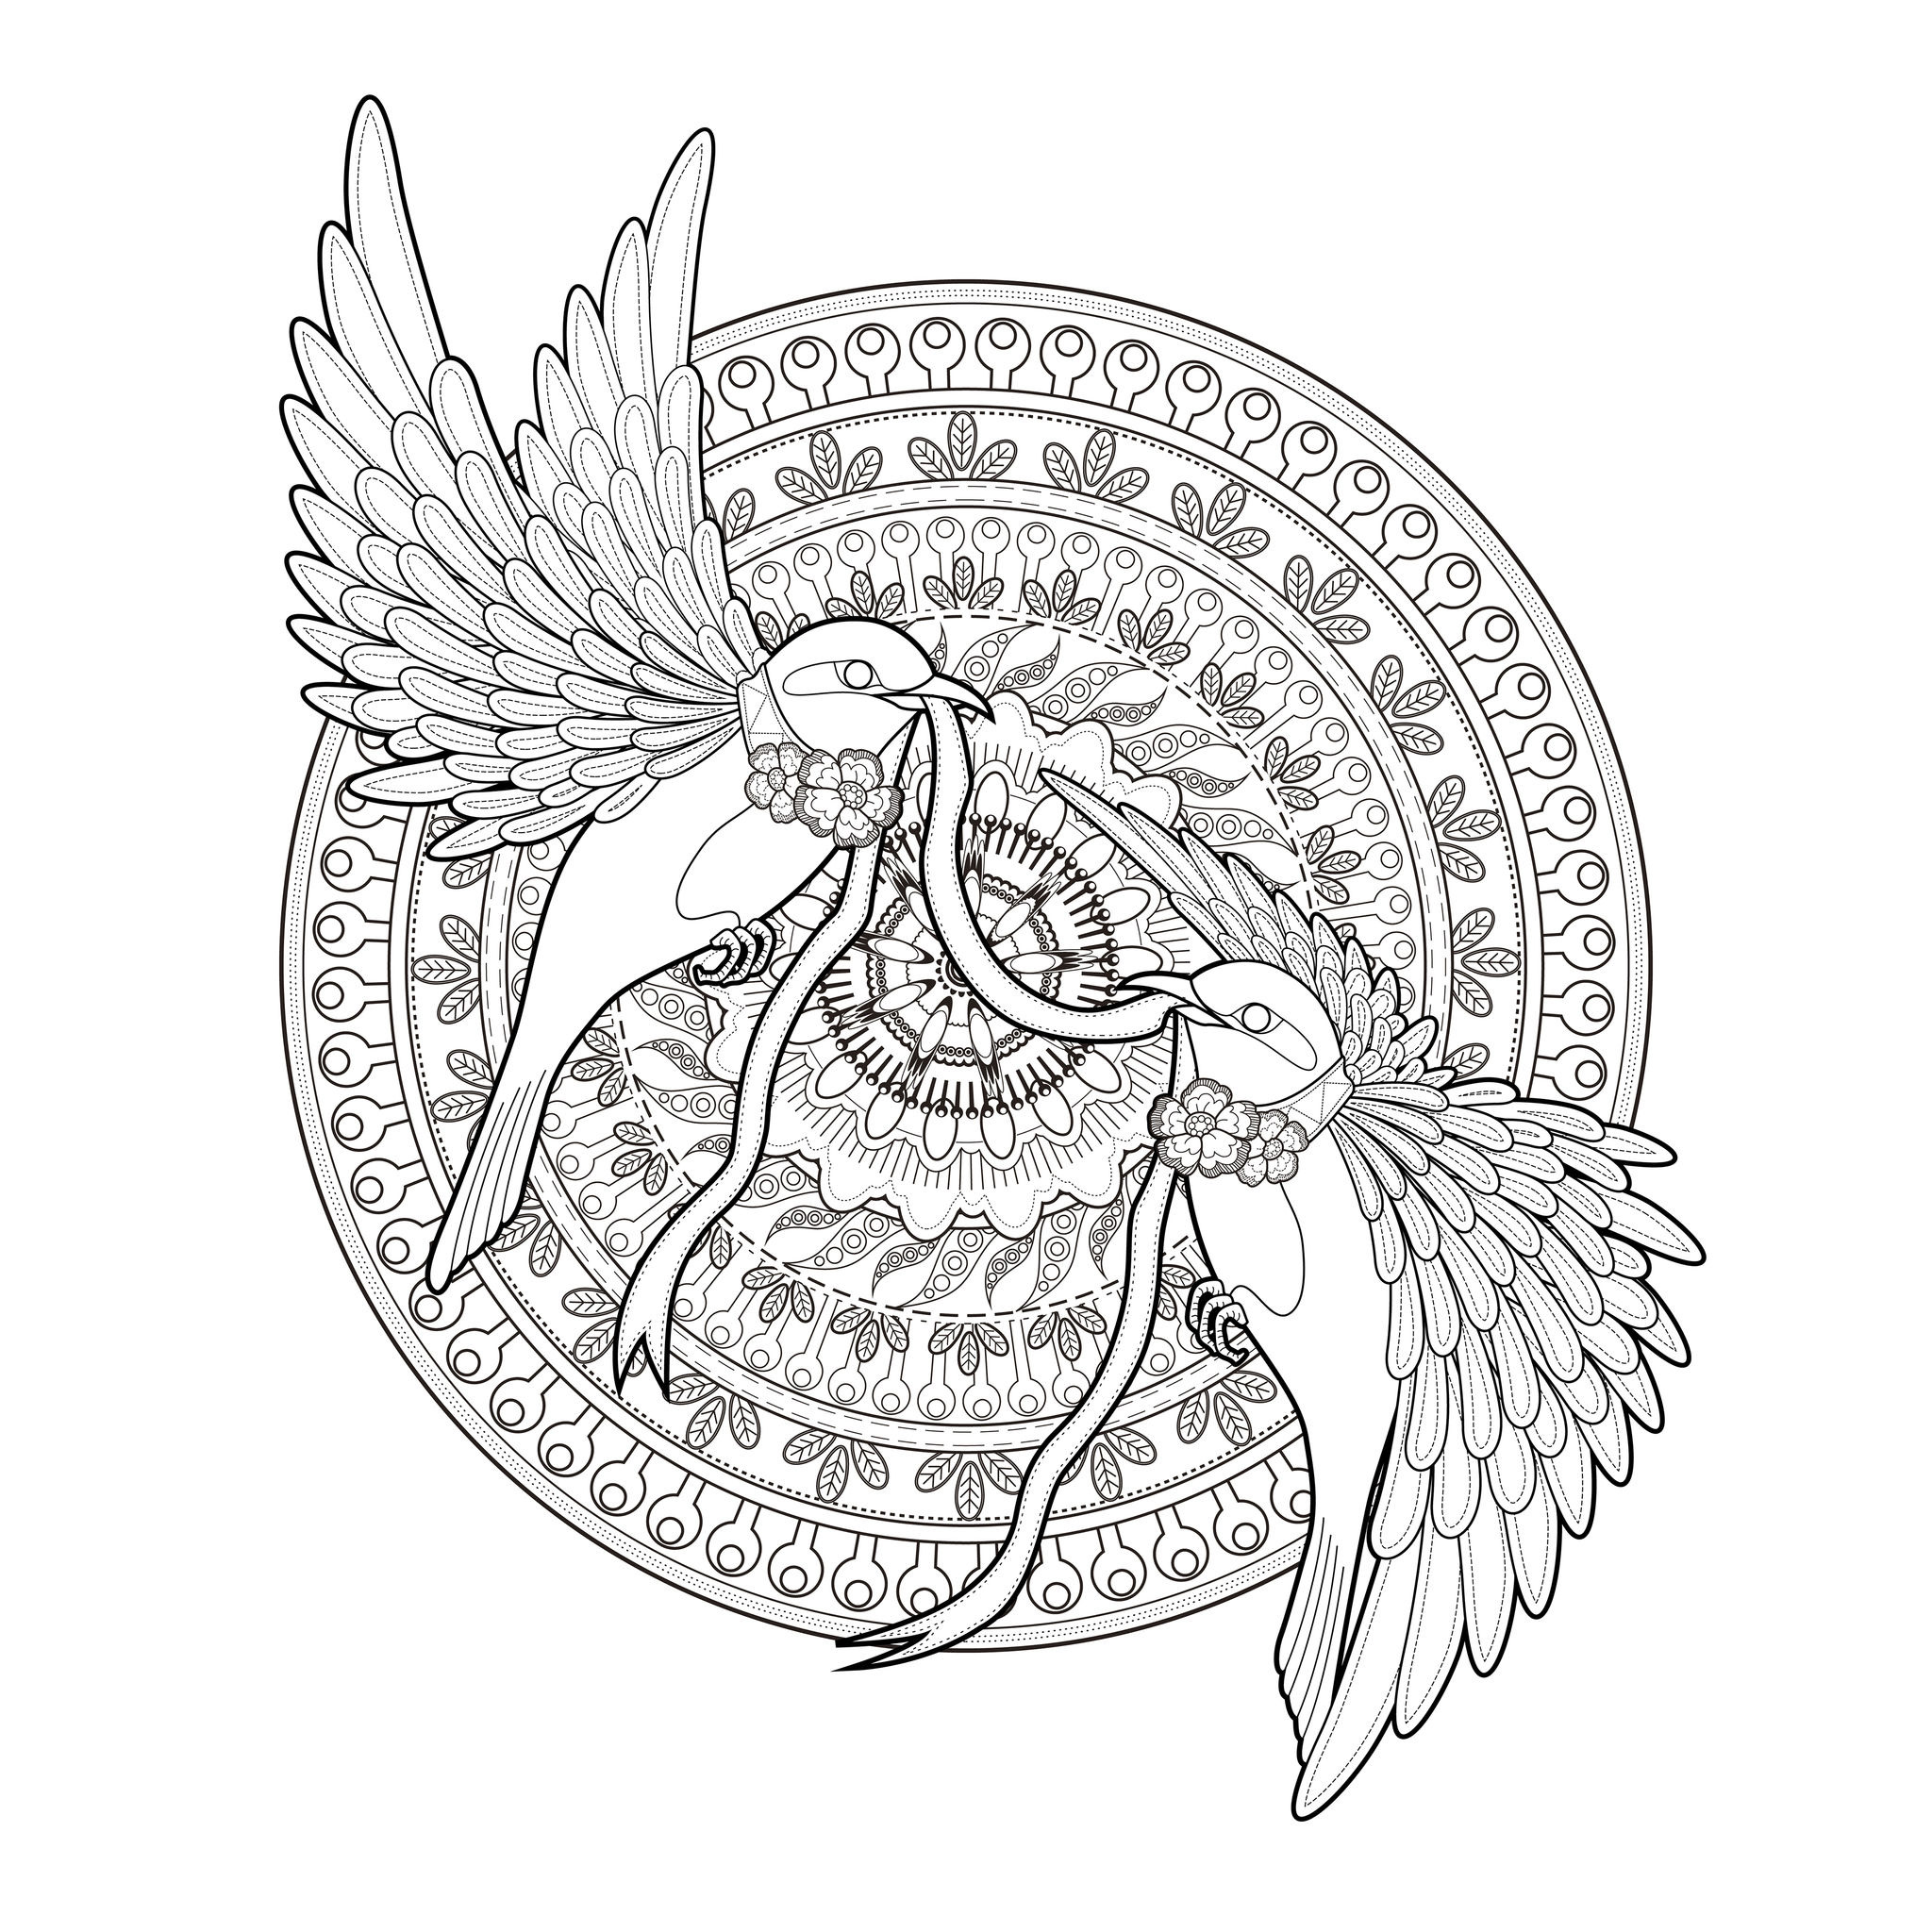 Golondrinas flying by kchung - Birds Adult Coloring Pages